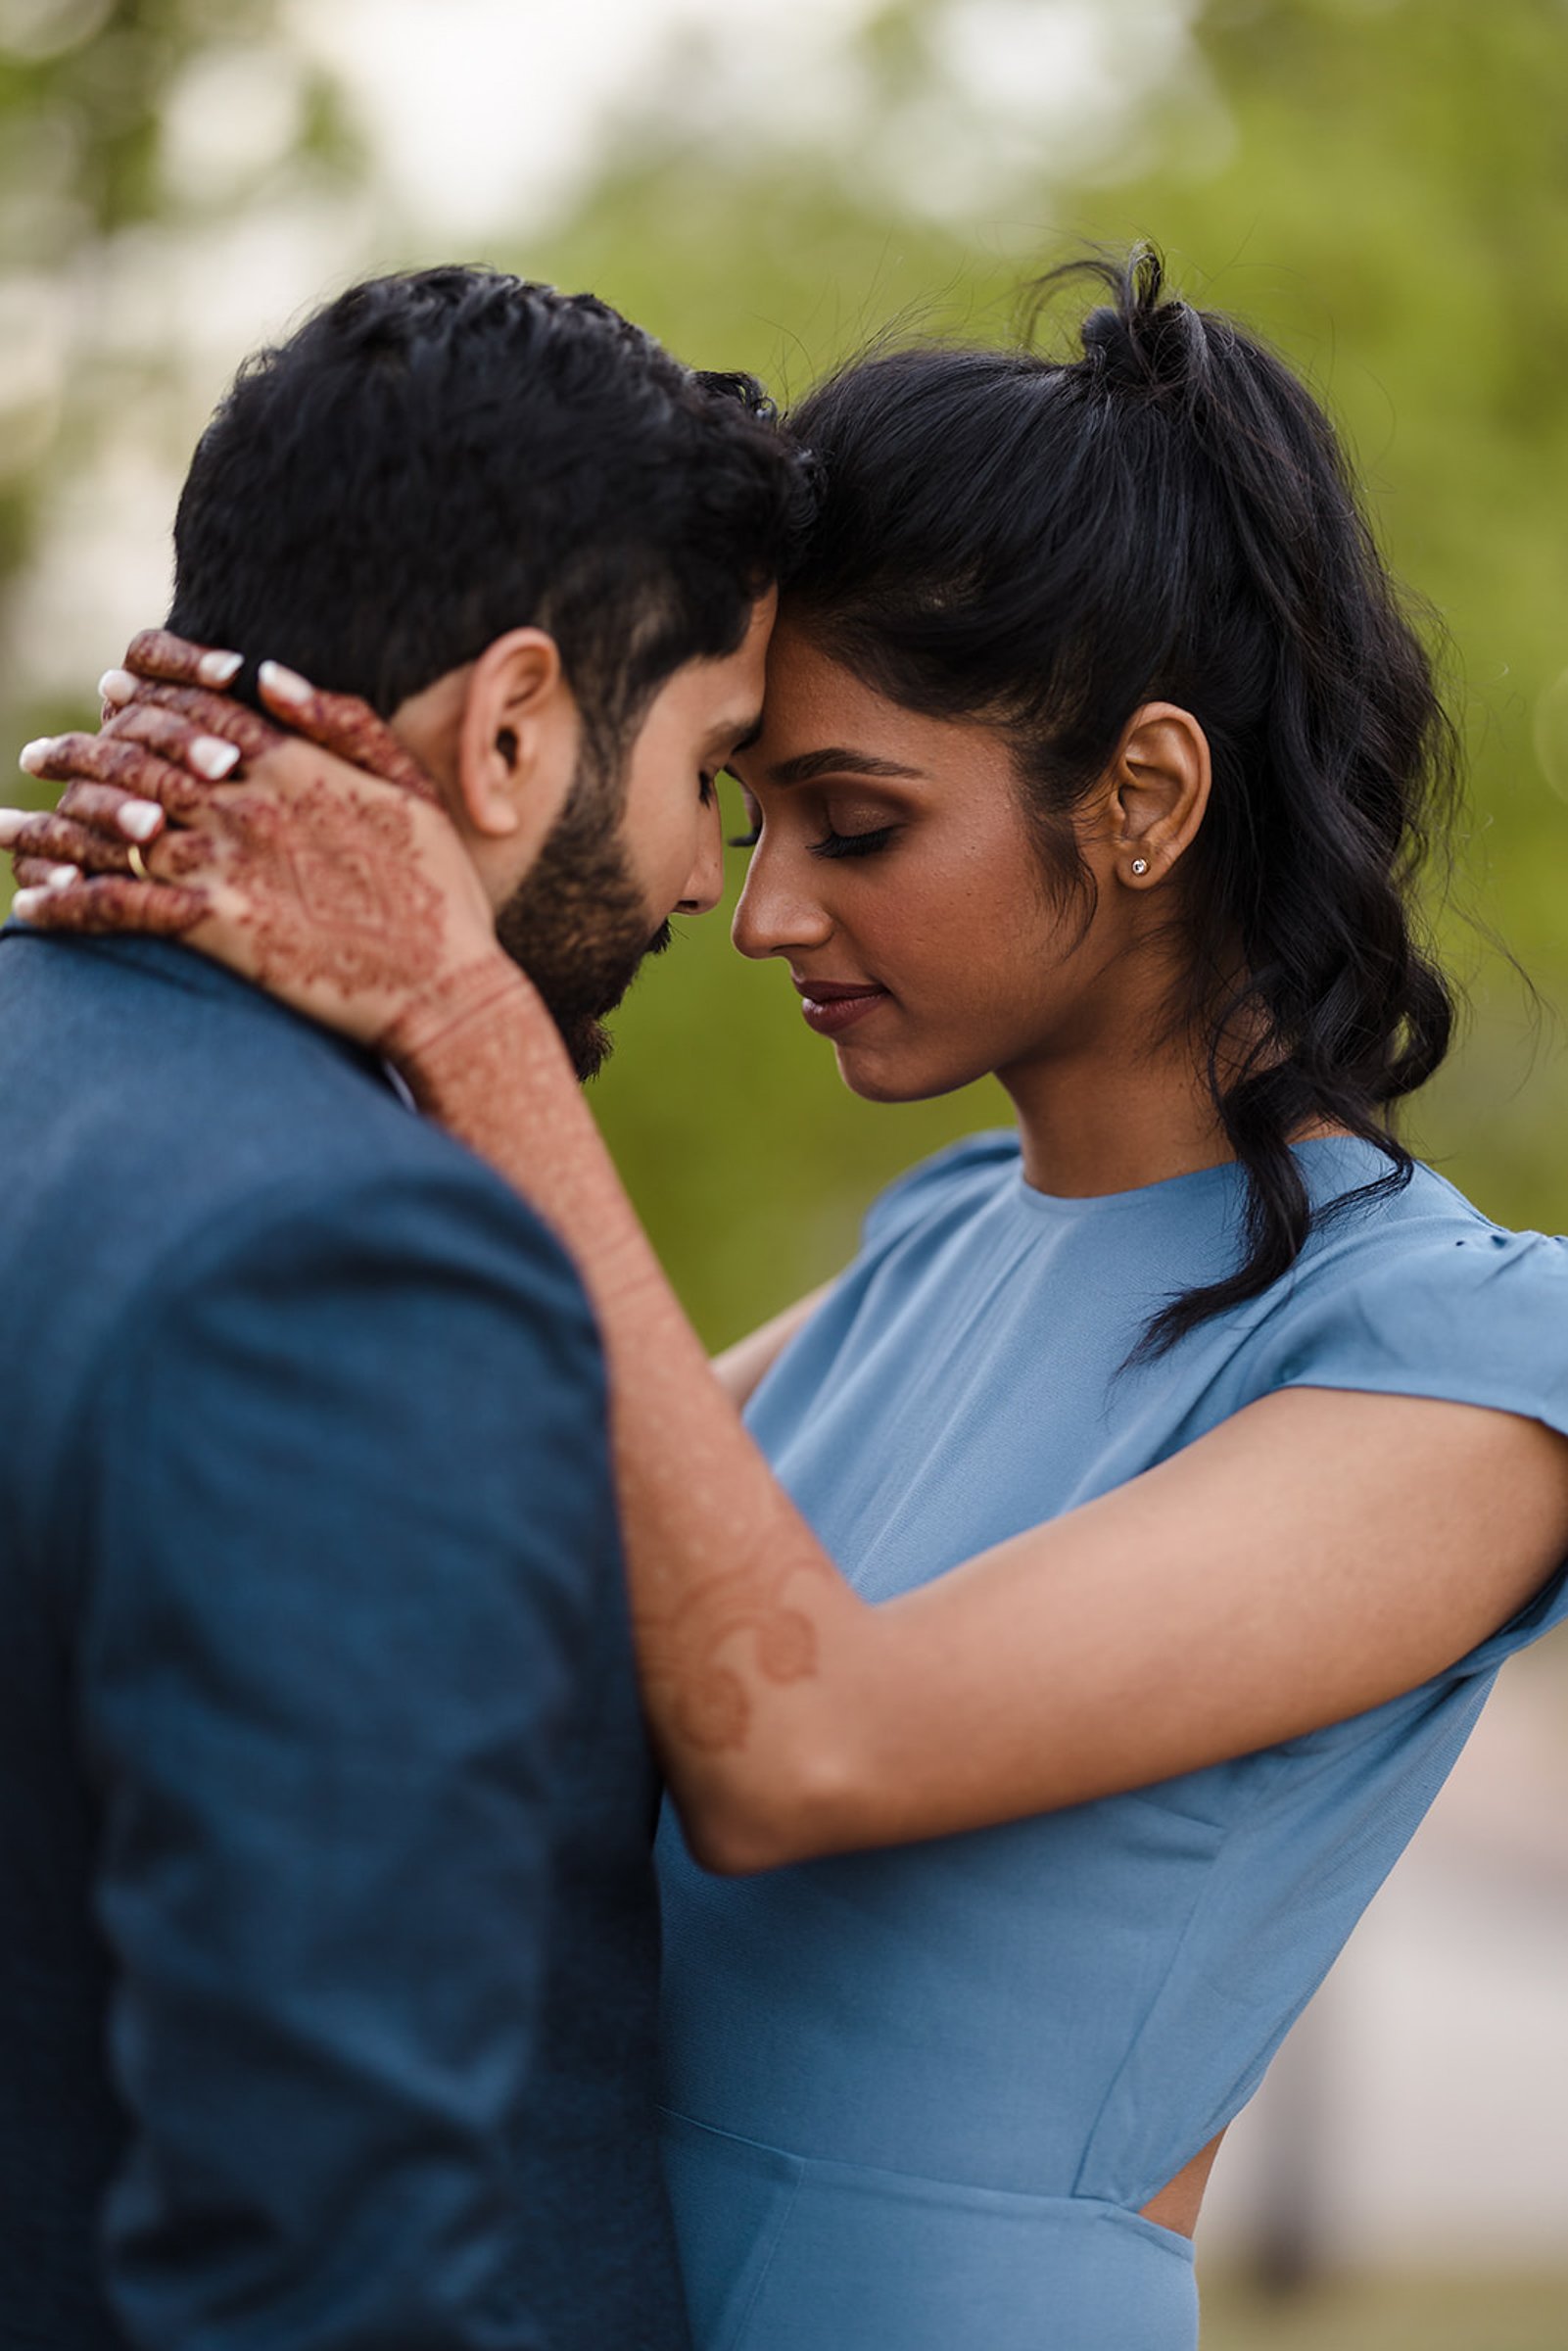 7 Indian Engagement Photo Ideas (that are Totally Adorable!)